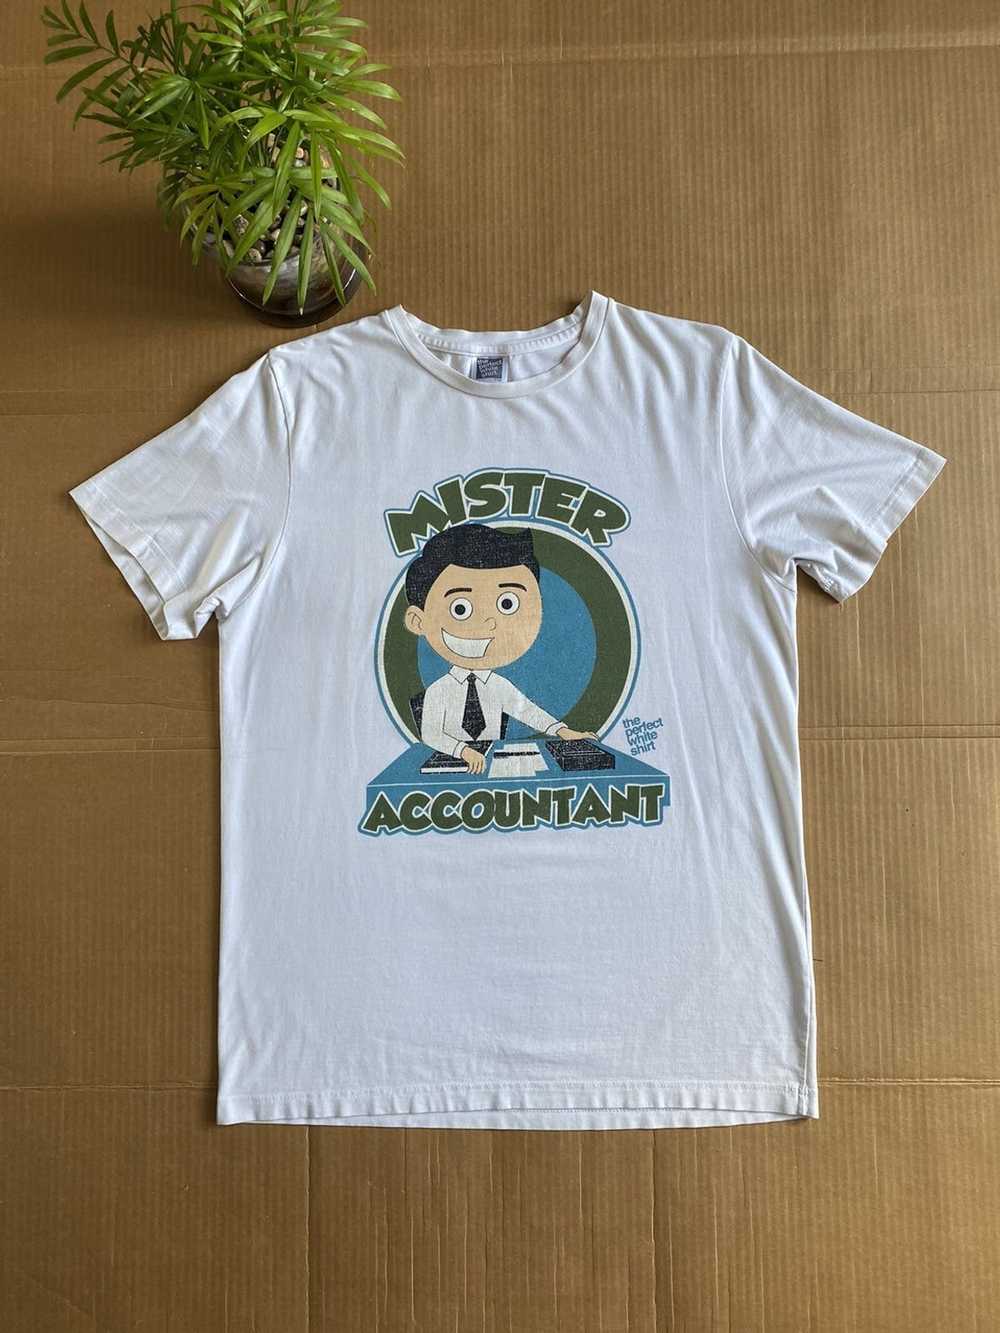 Other × Vintage Vintage Mister Accountant Graphic… - image 2